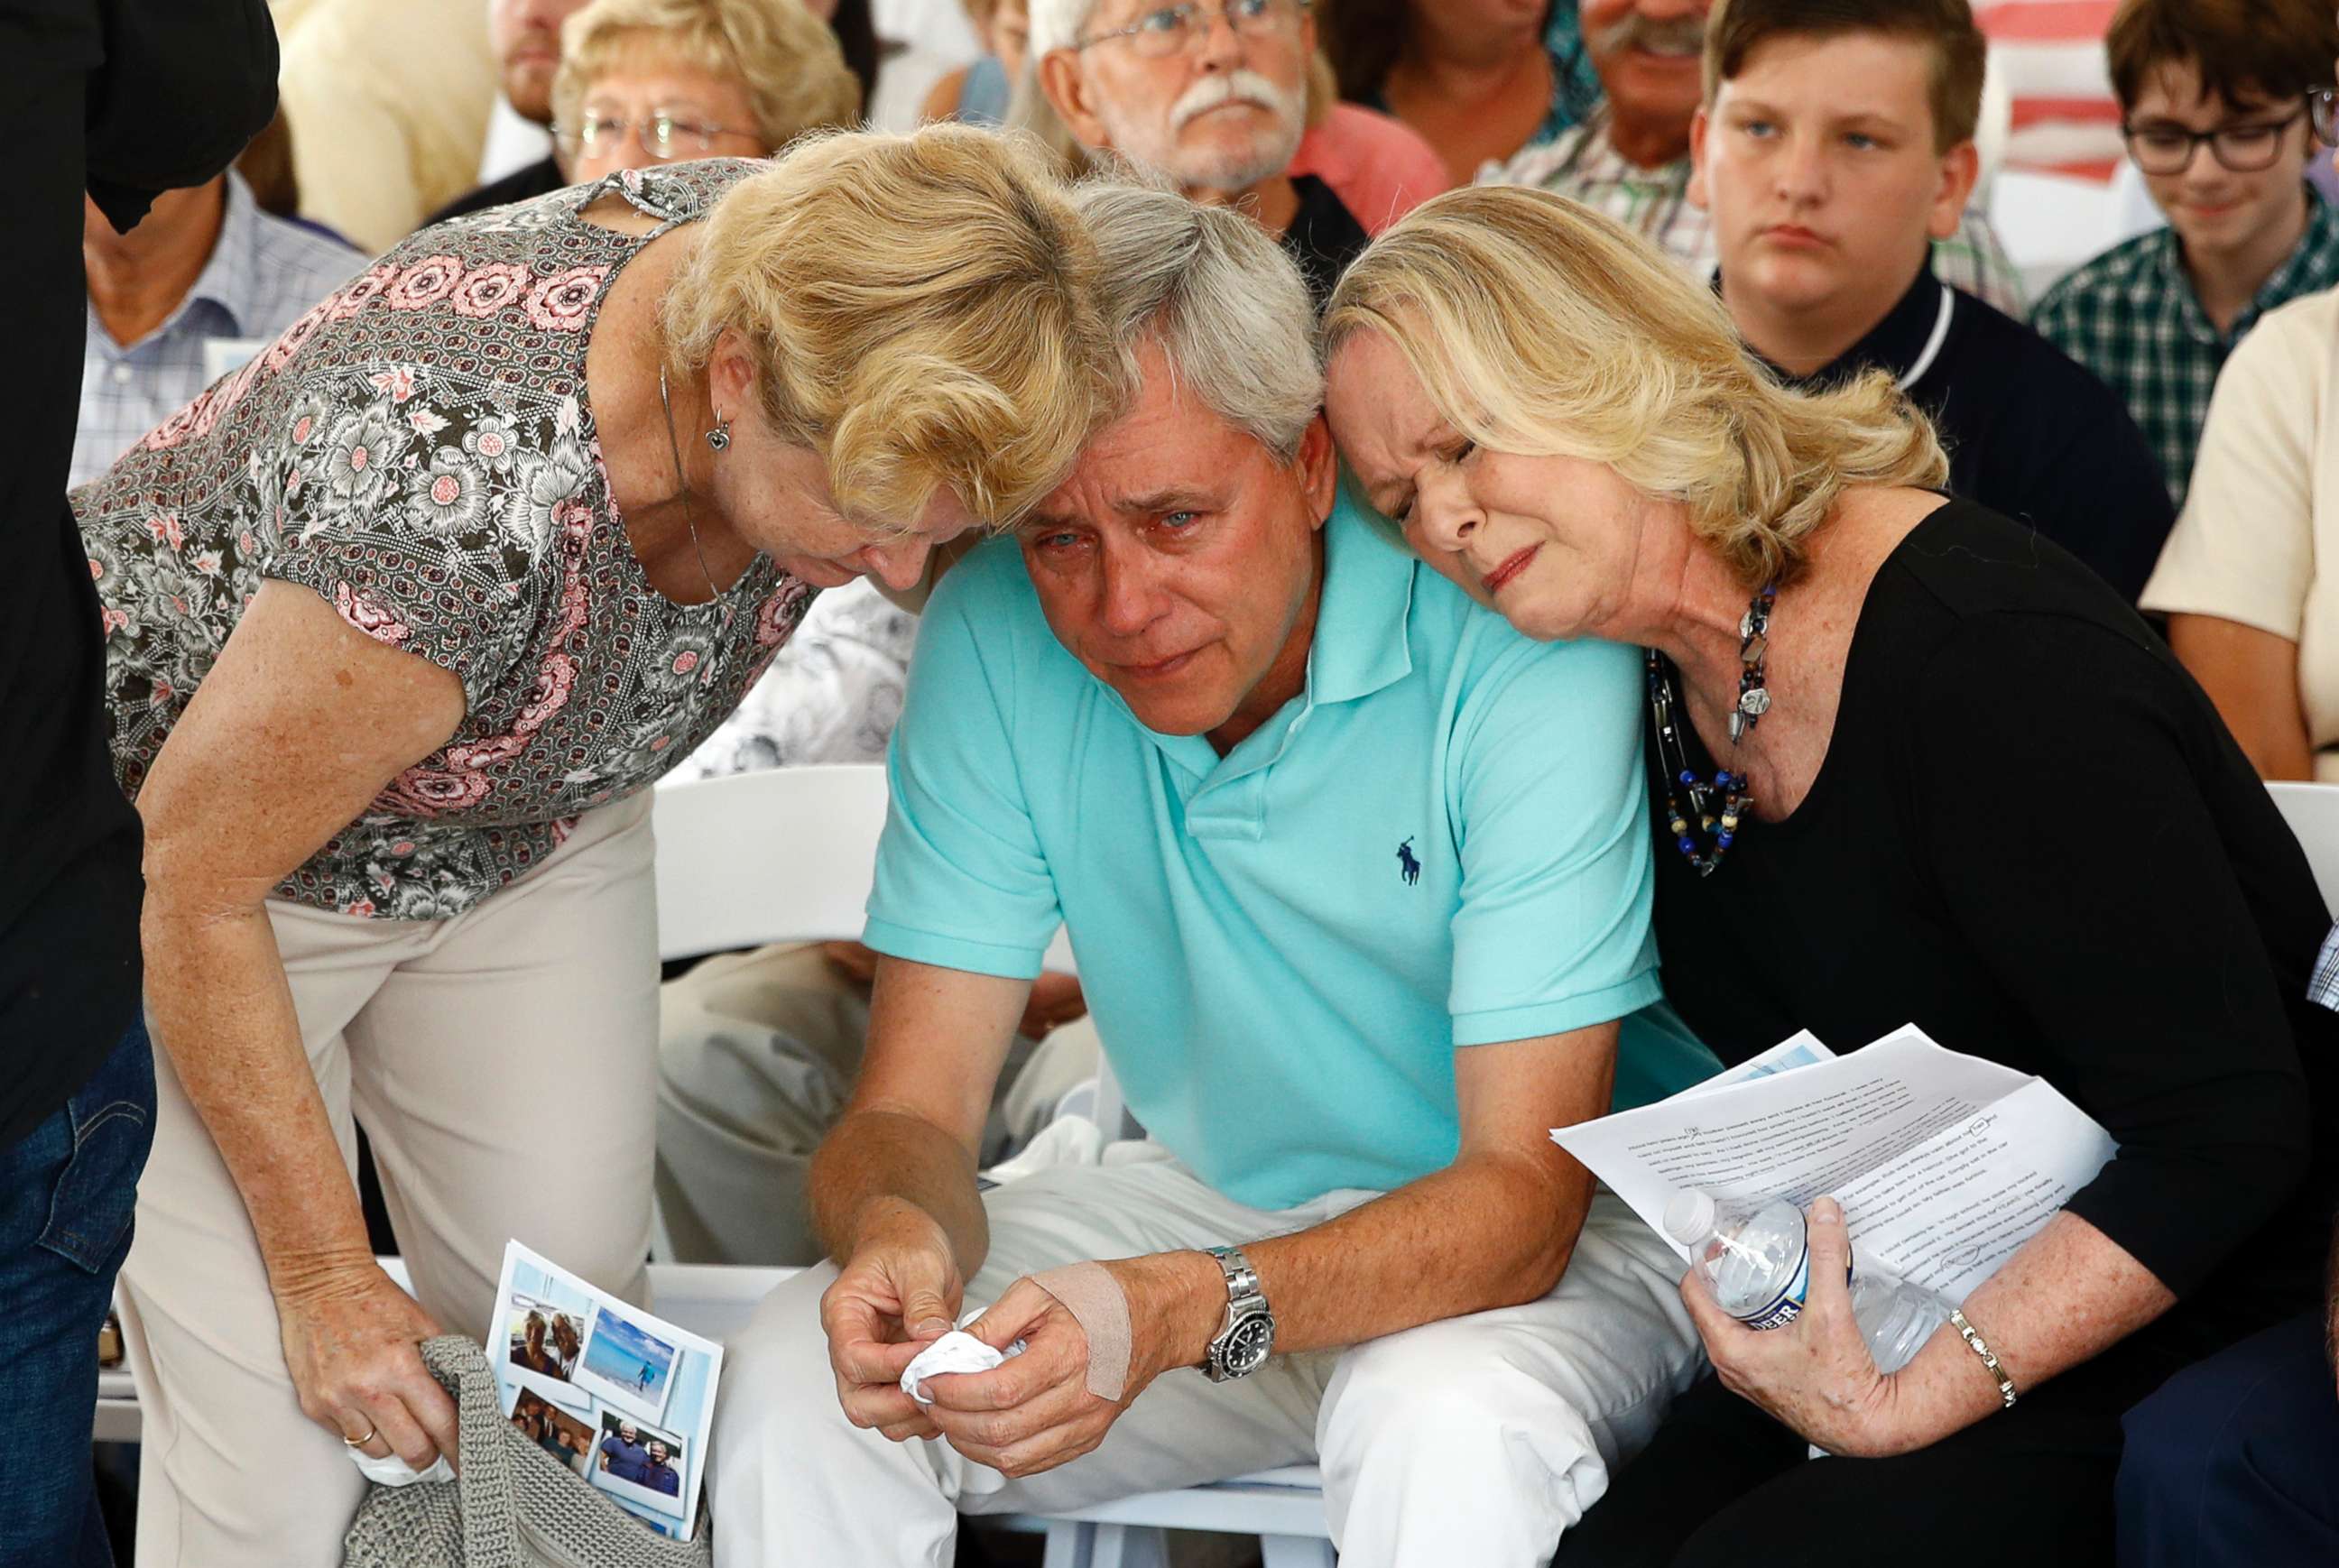 PHOTO: Carl Hiaasen, center, brother of Rob Hiaasen, is consoled by his sister Judy, right, during a memorial service, July 2, 2018, in Owings Mills, Md.